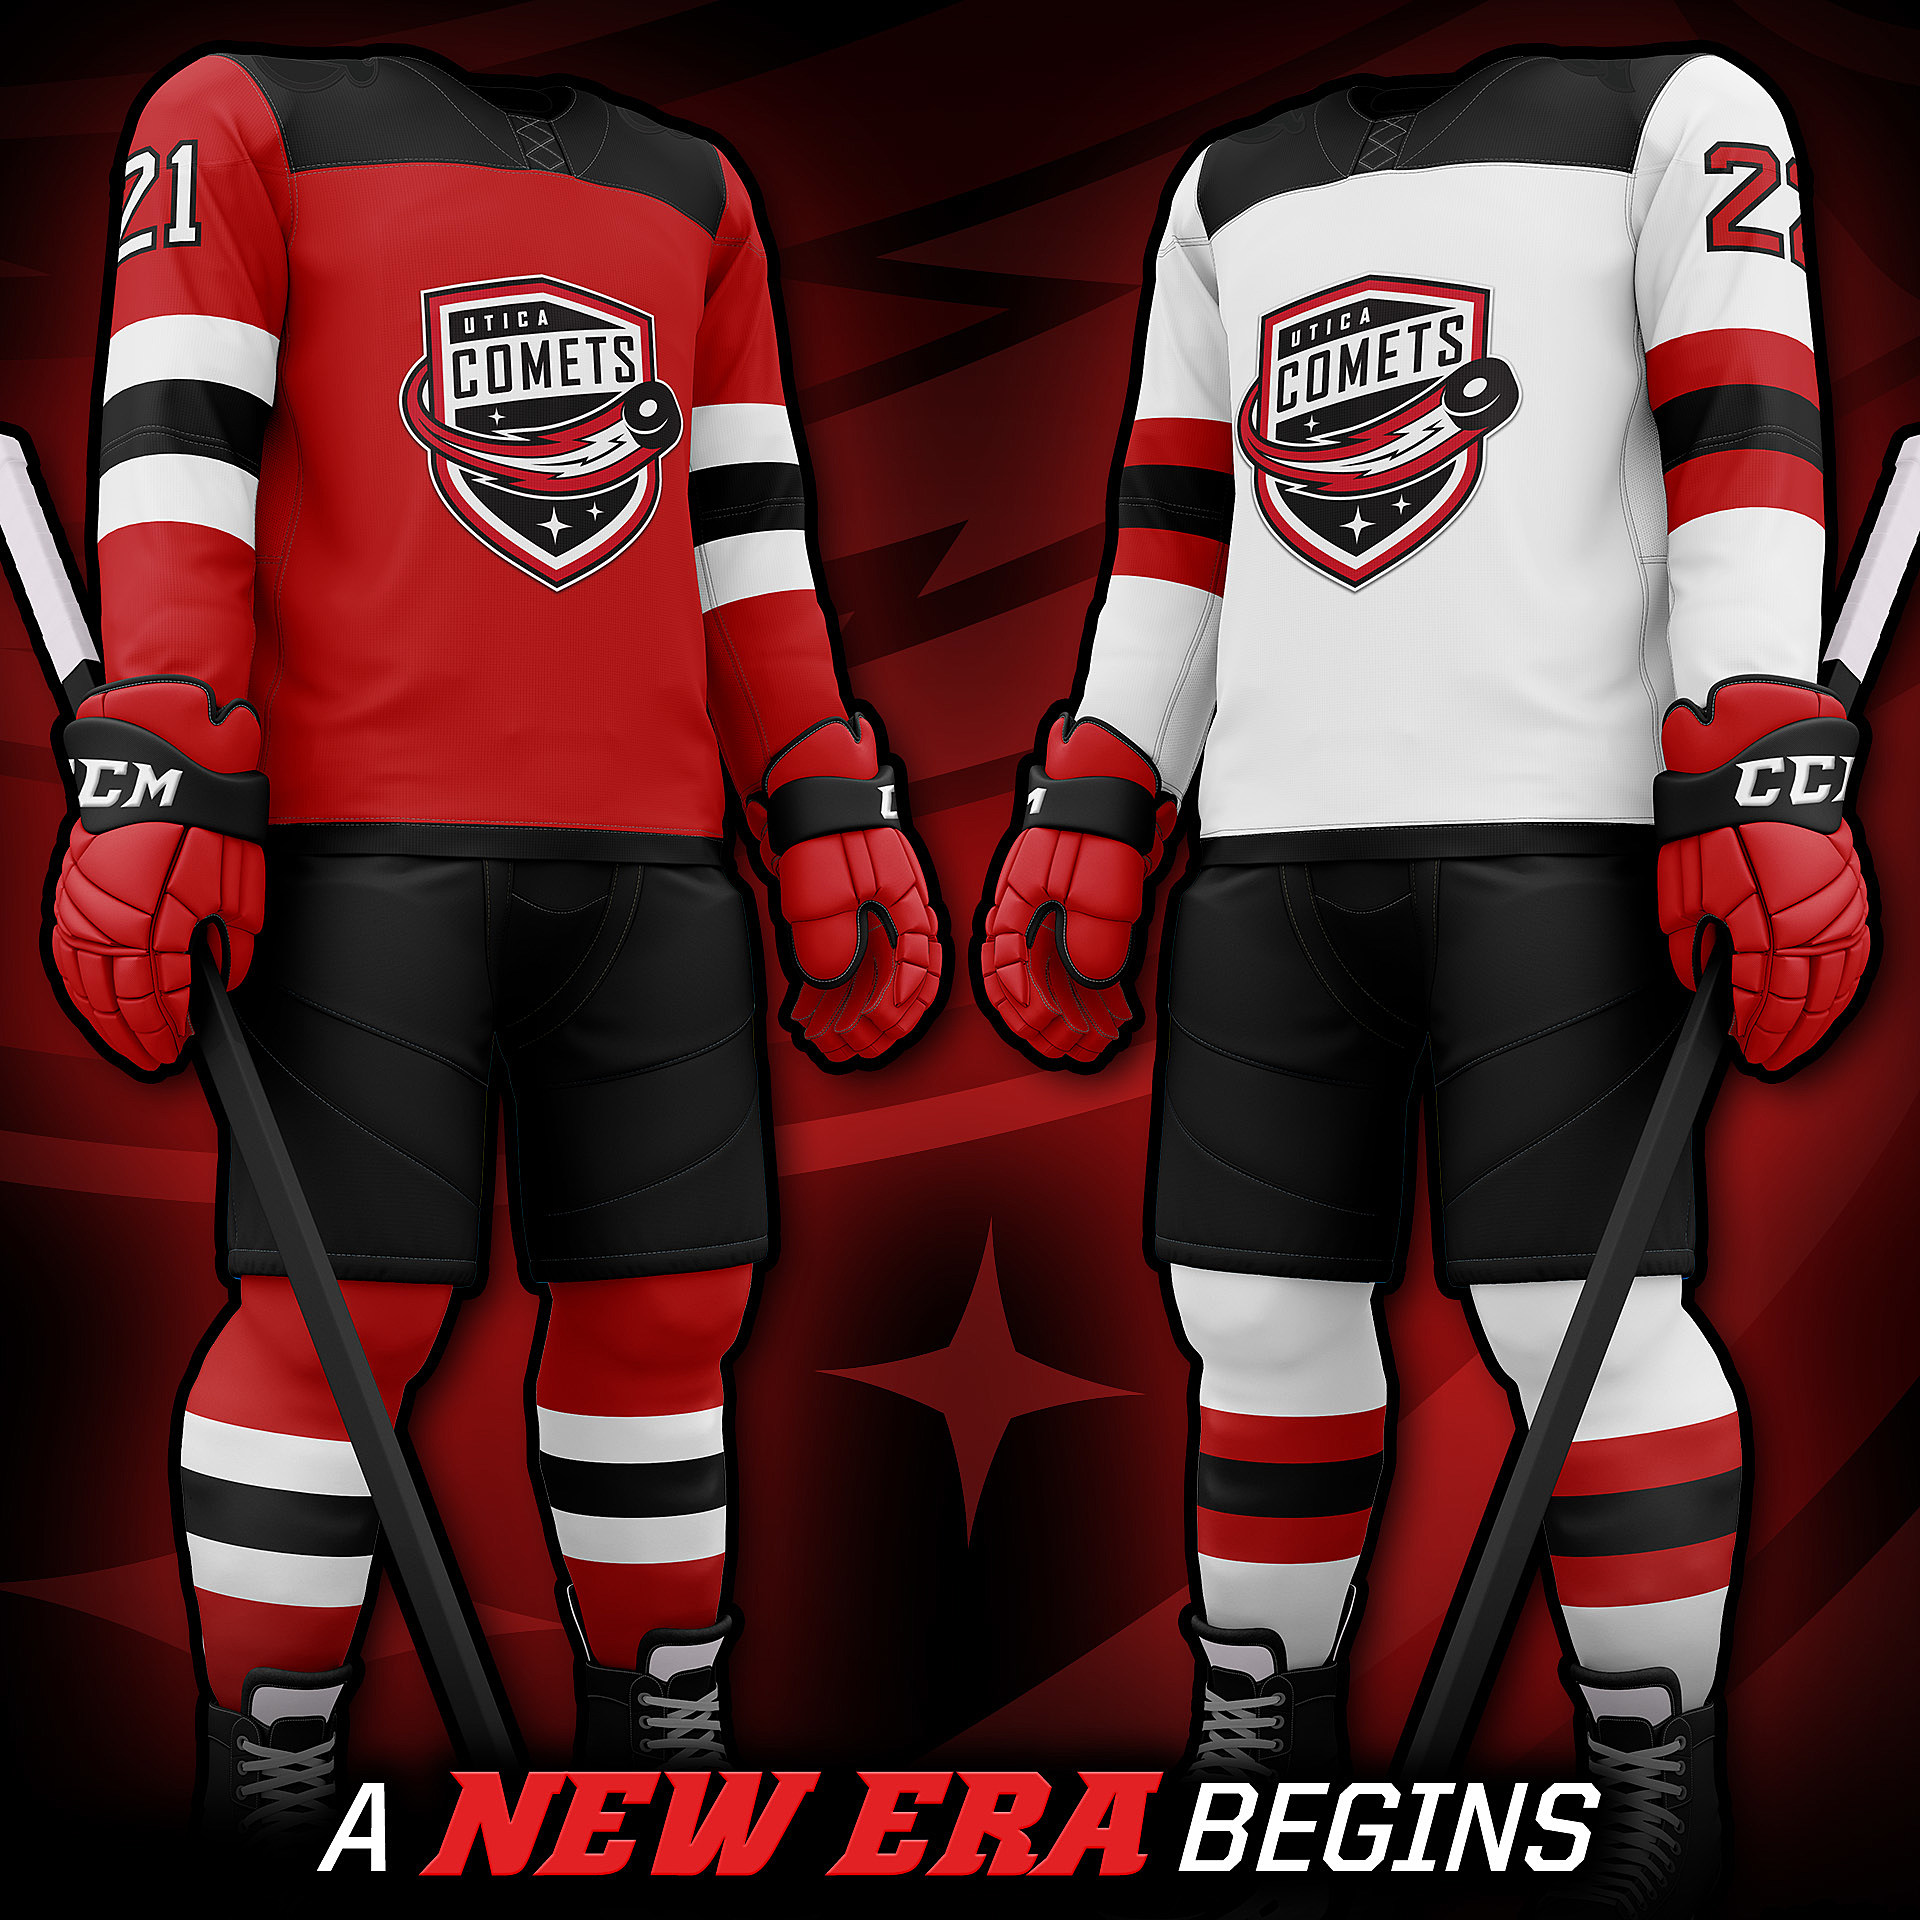 Take A Look Comets Fans! New Jerseys For A New Season